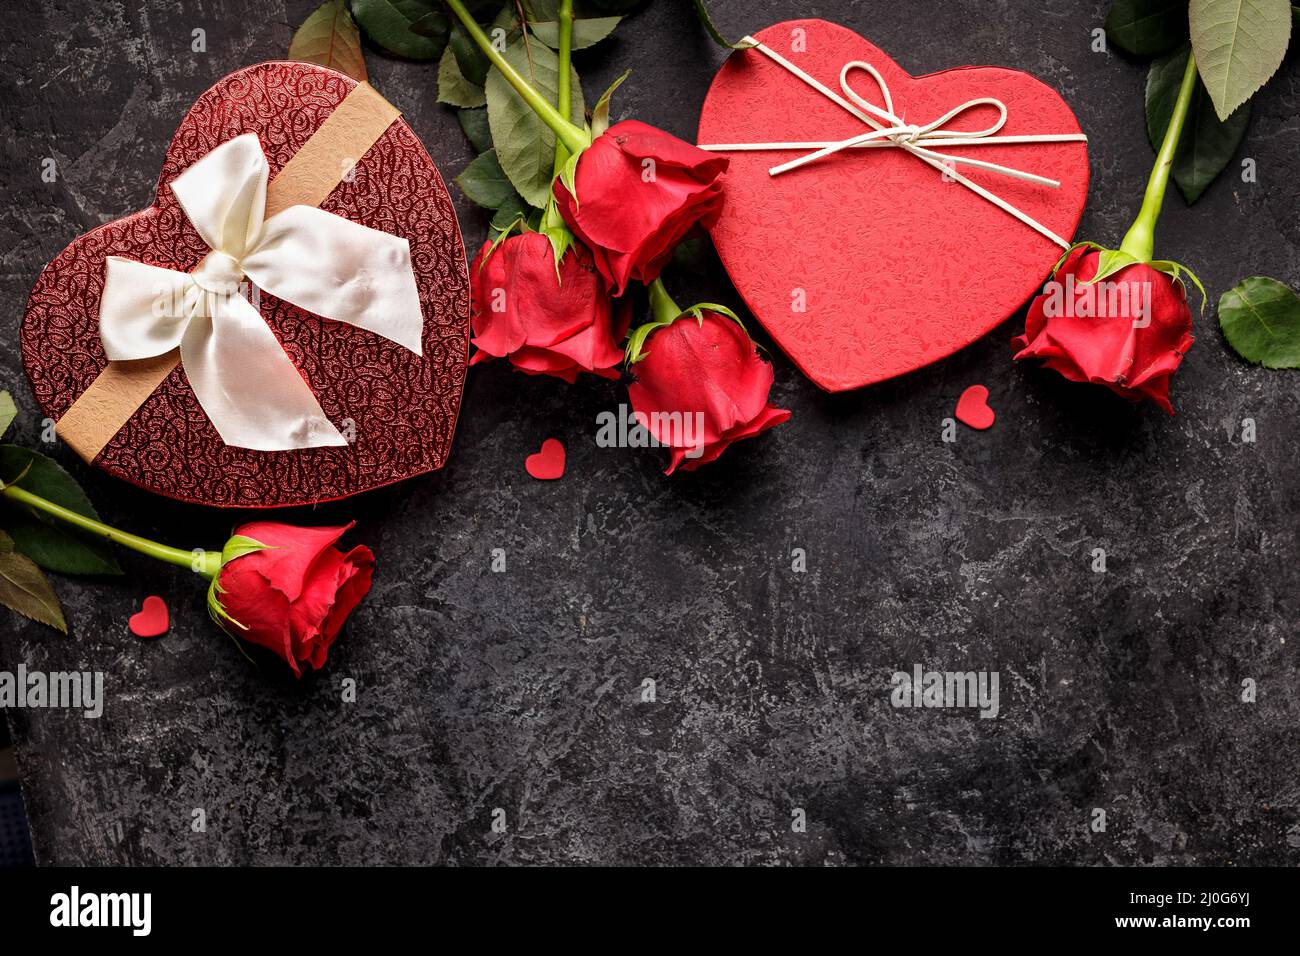 Celebration concept for Saint Valentines day or birthday with hearth shaped gift box and bouquets of red rose Stock Photo